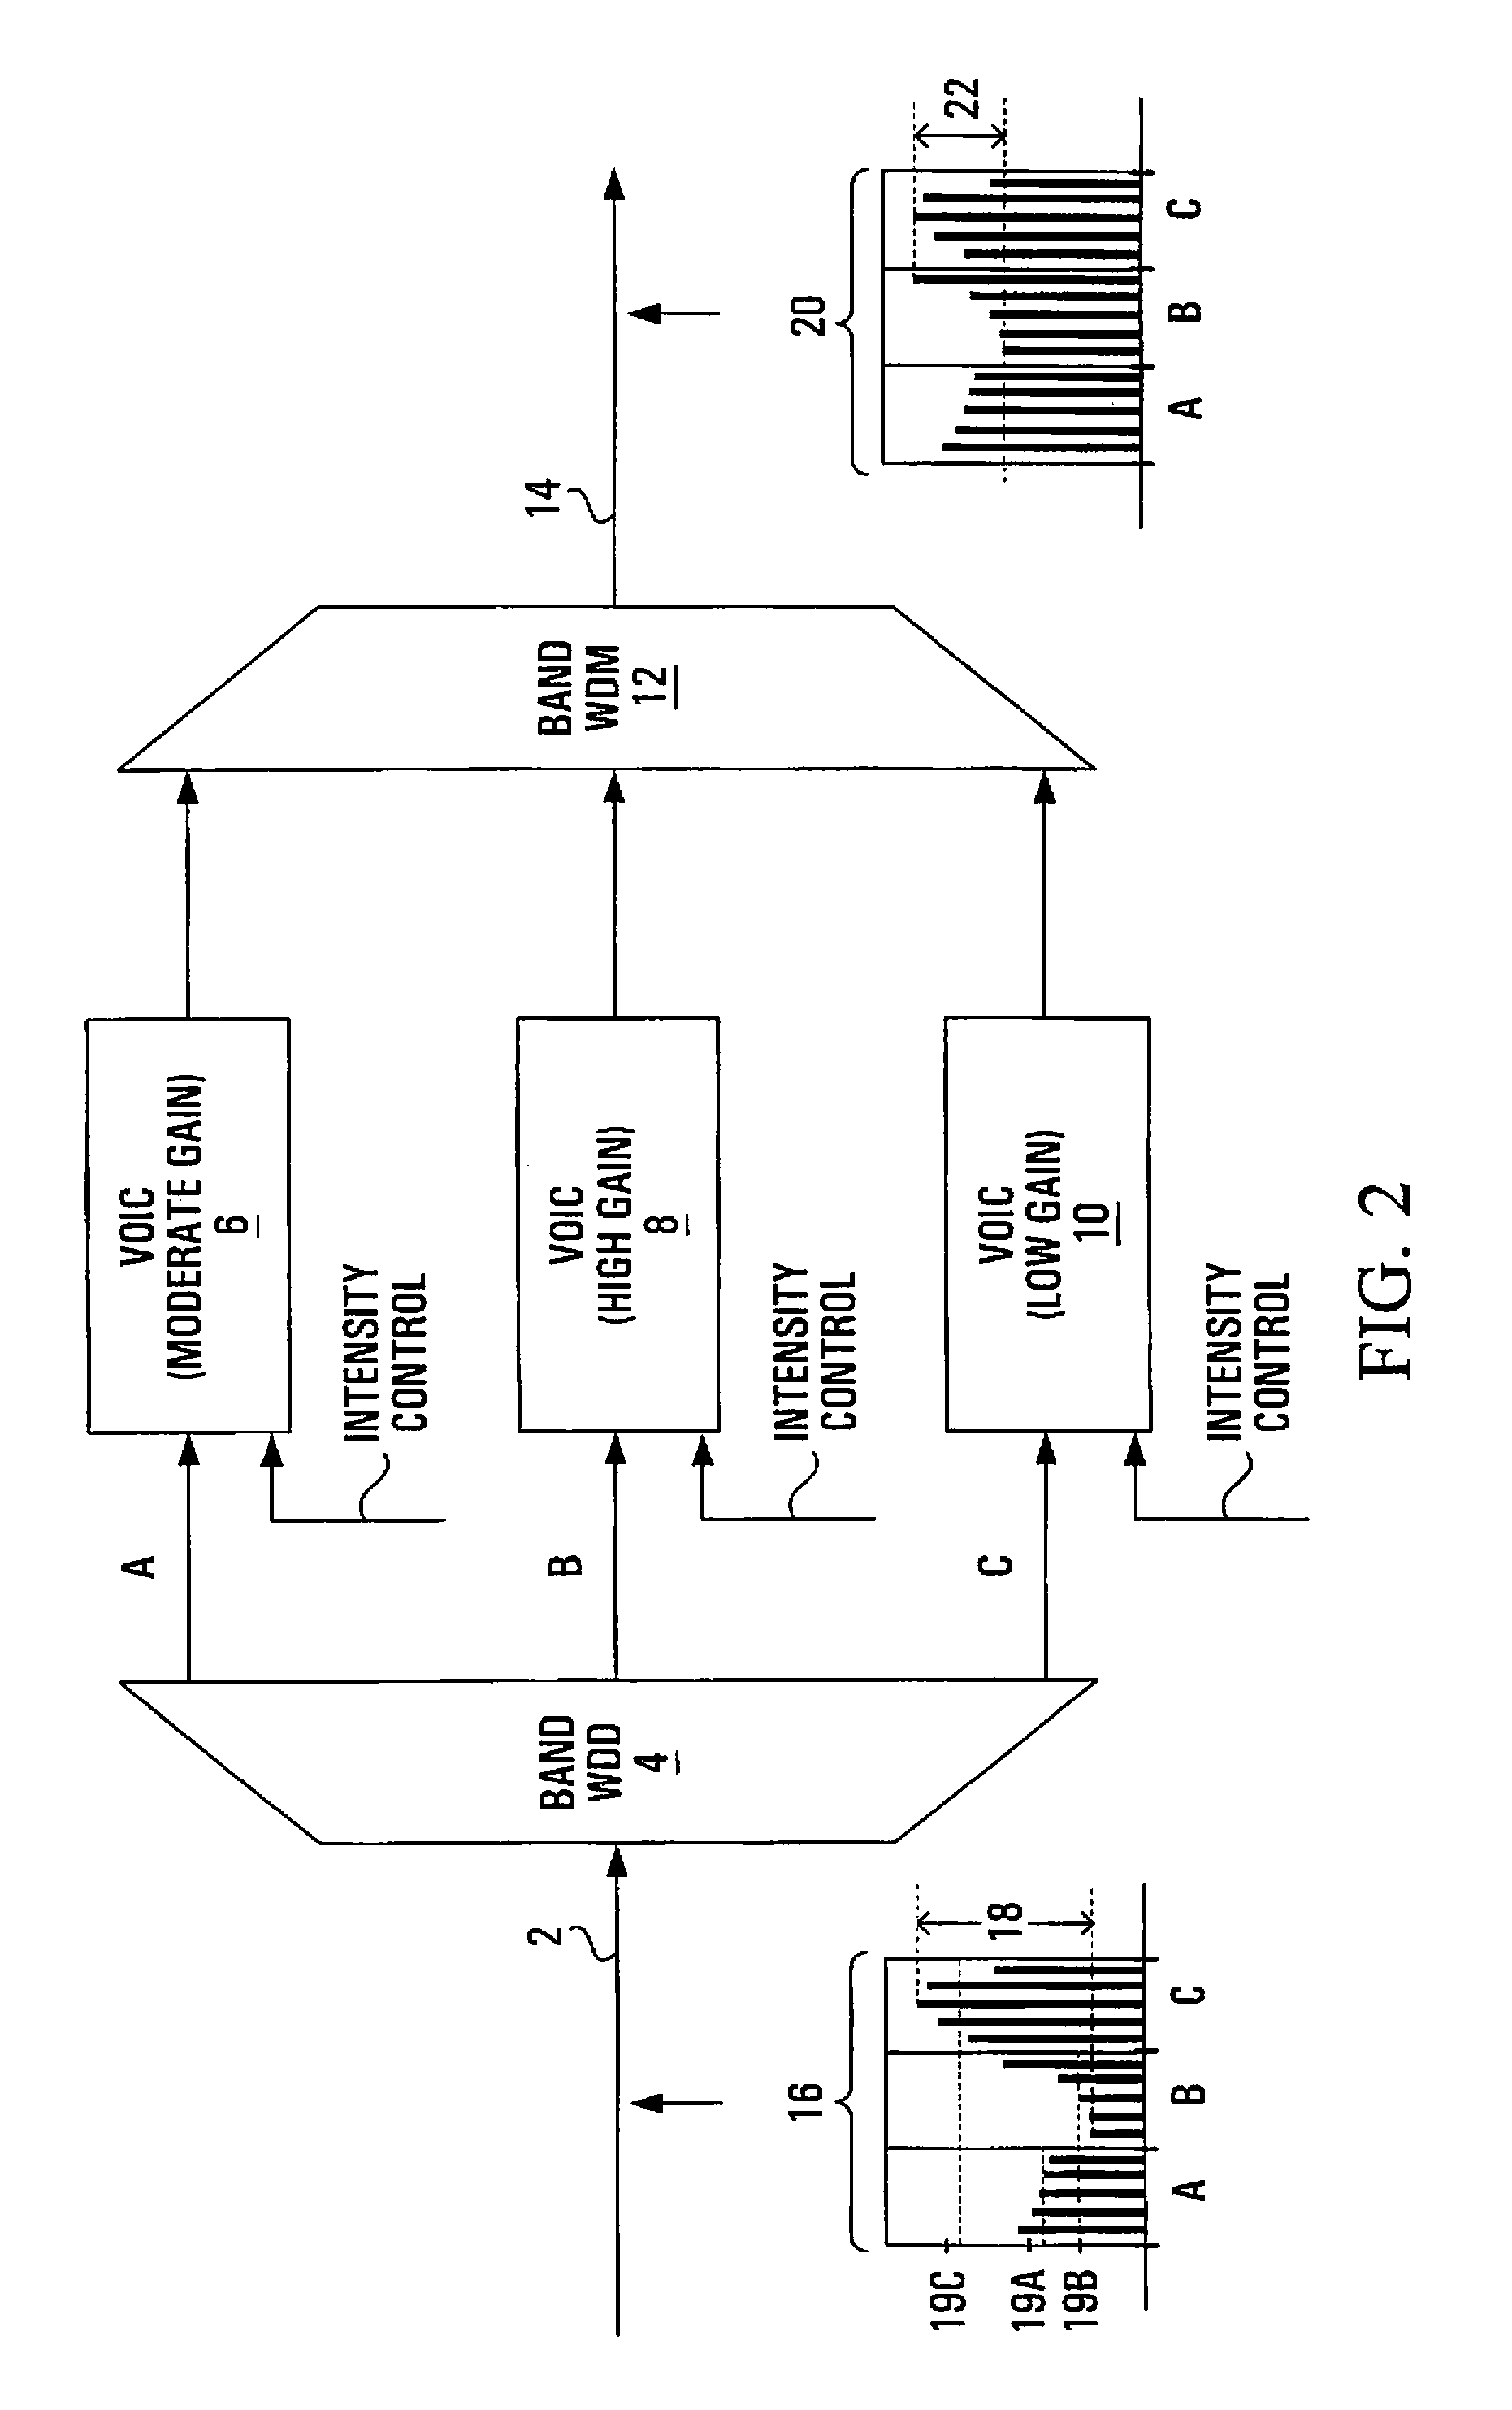 Optical switch with power equalization